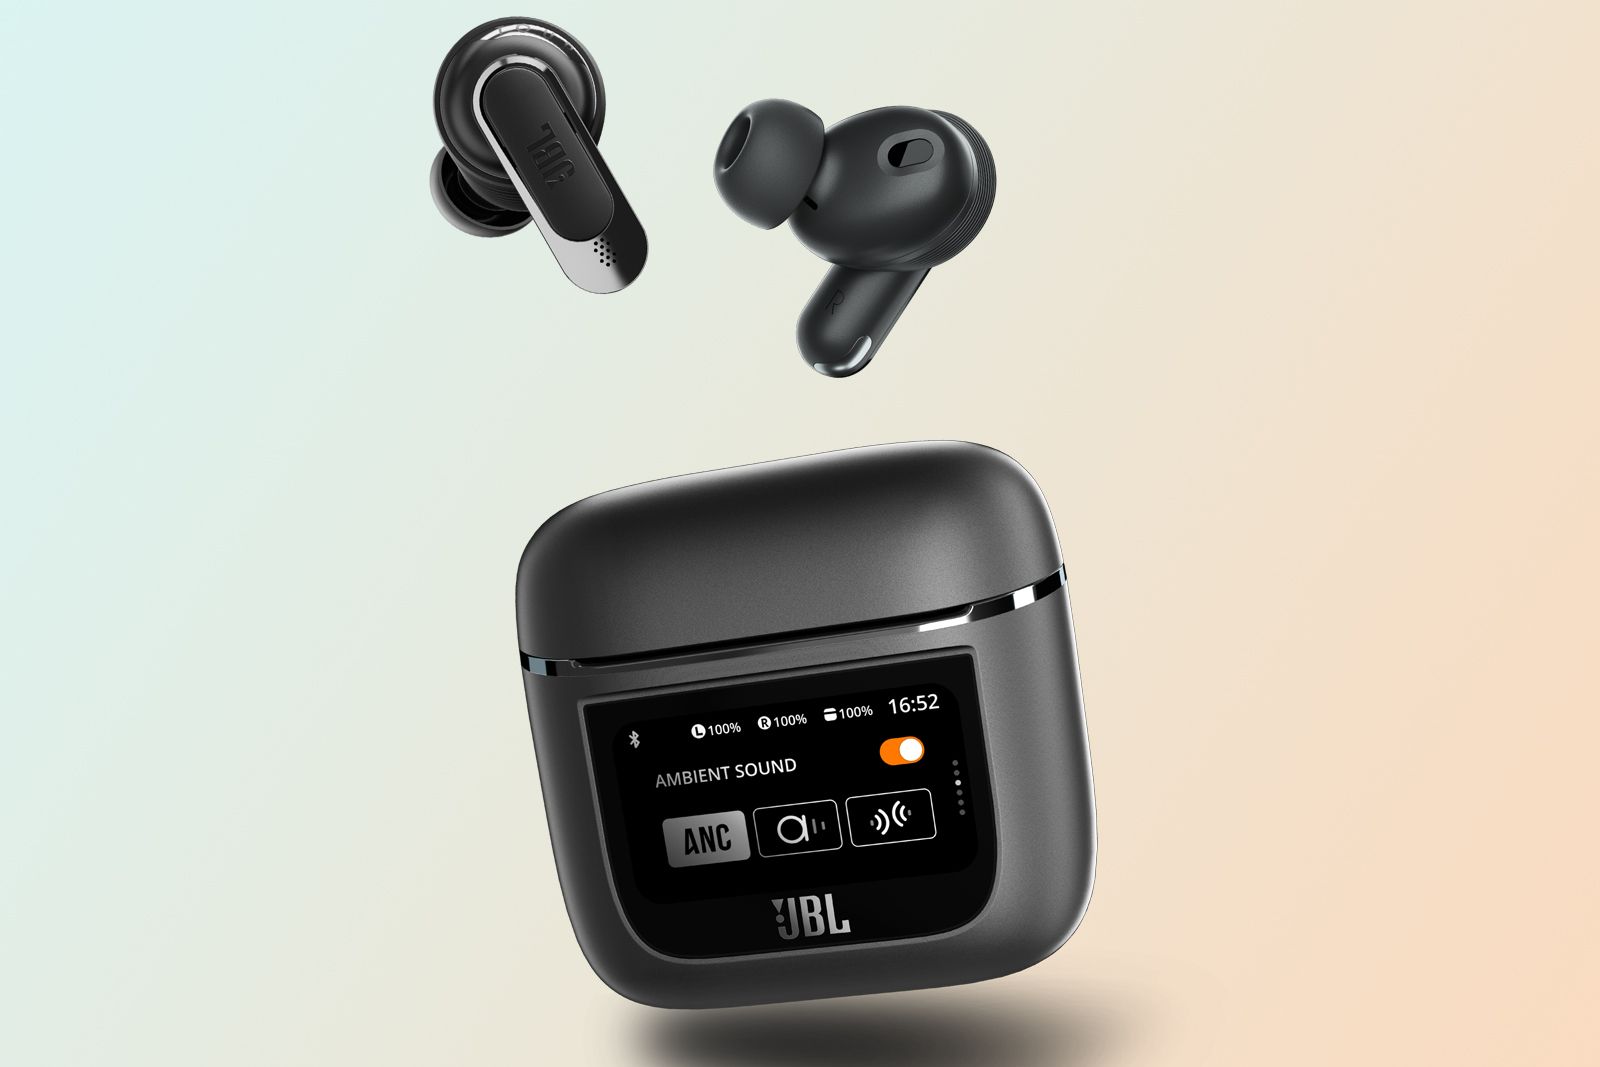 JBL Tour Pro 2 headphones have a charging case with a display, take note AirPods photo 2